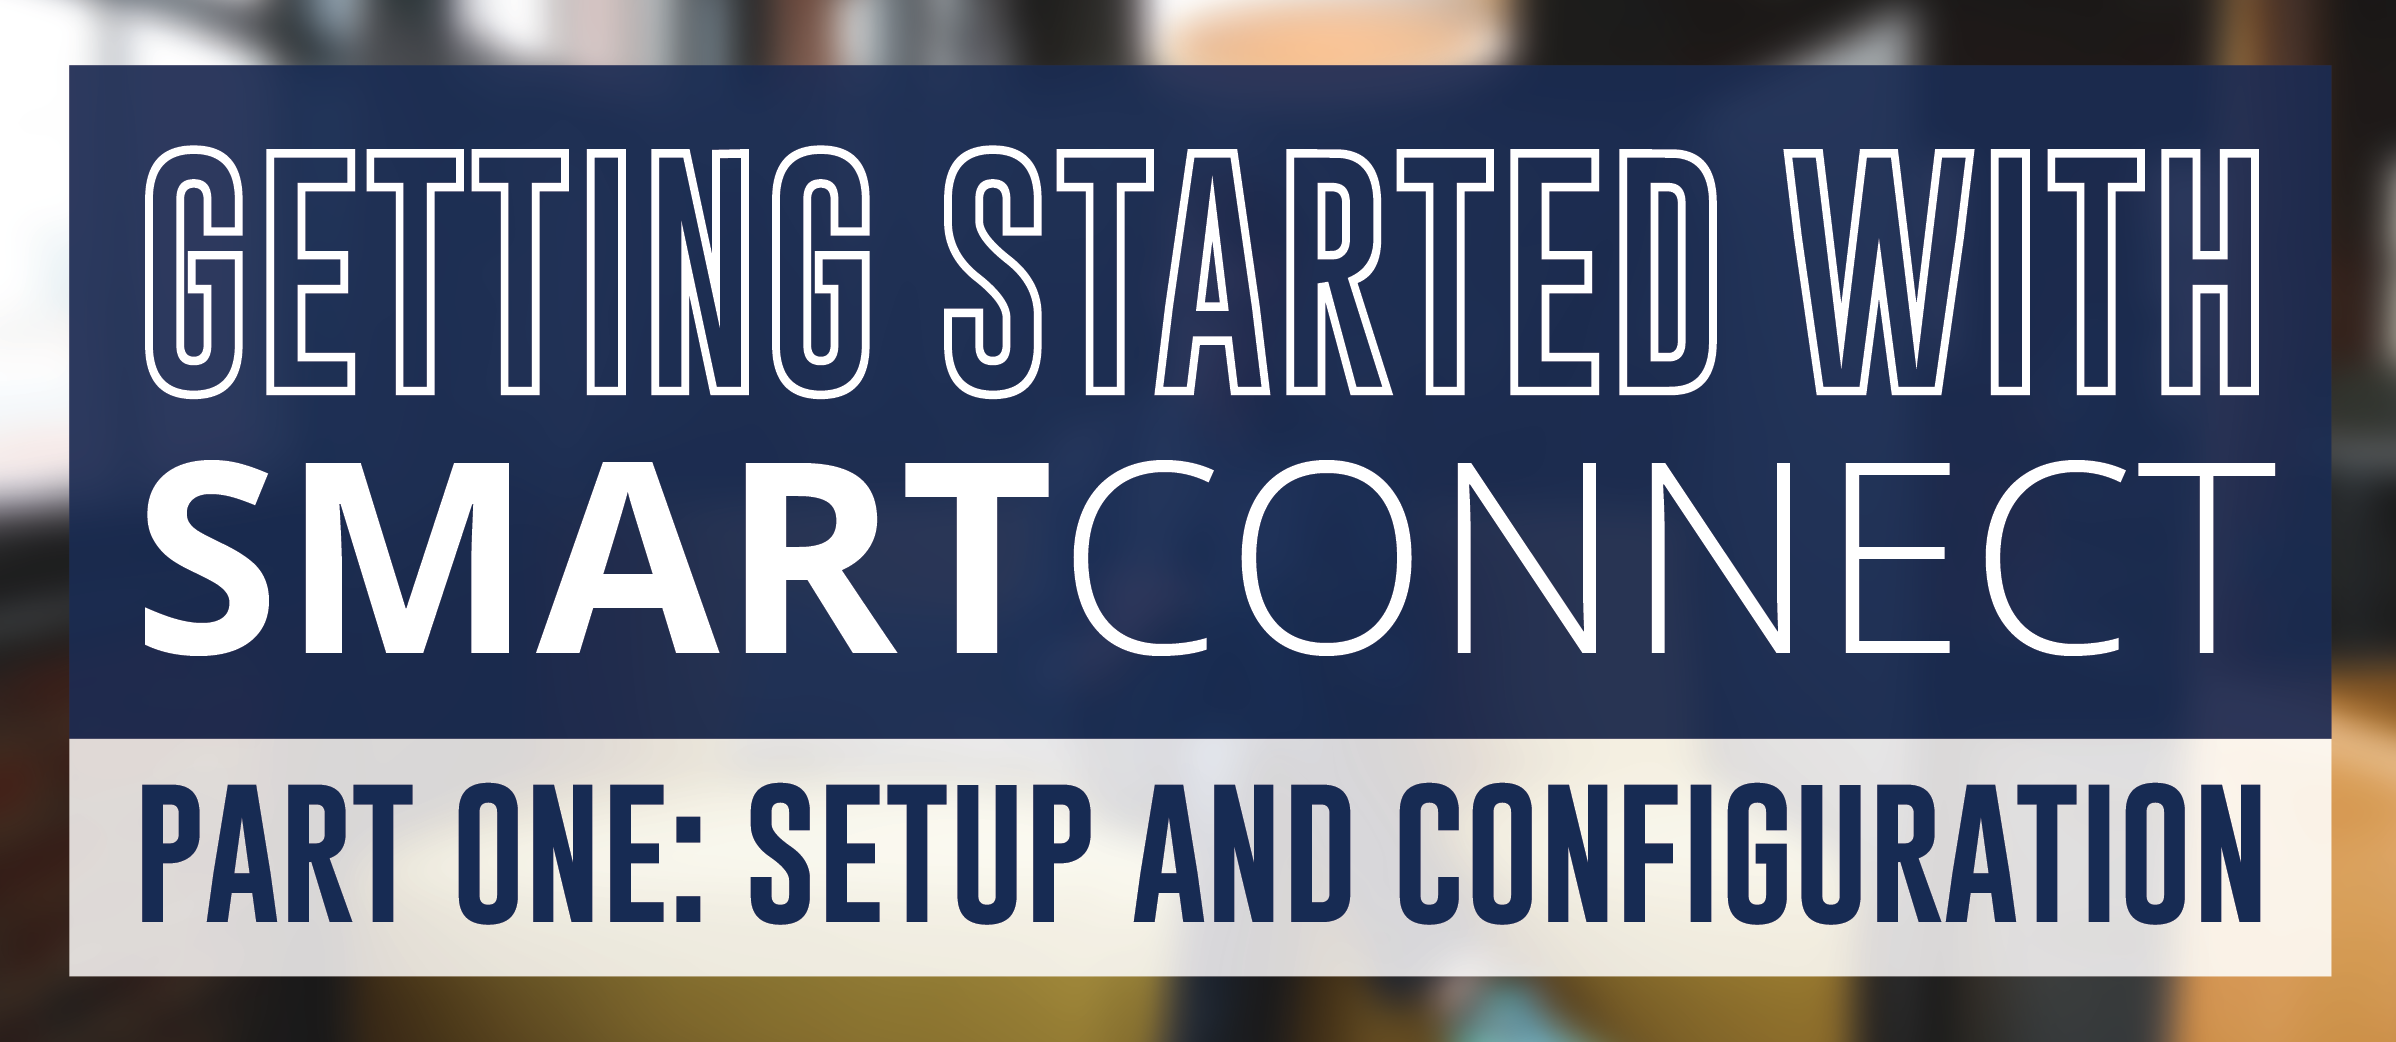 Getting Started with SmartConnect Part 1